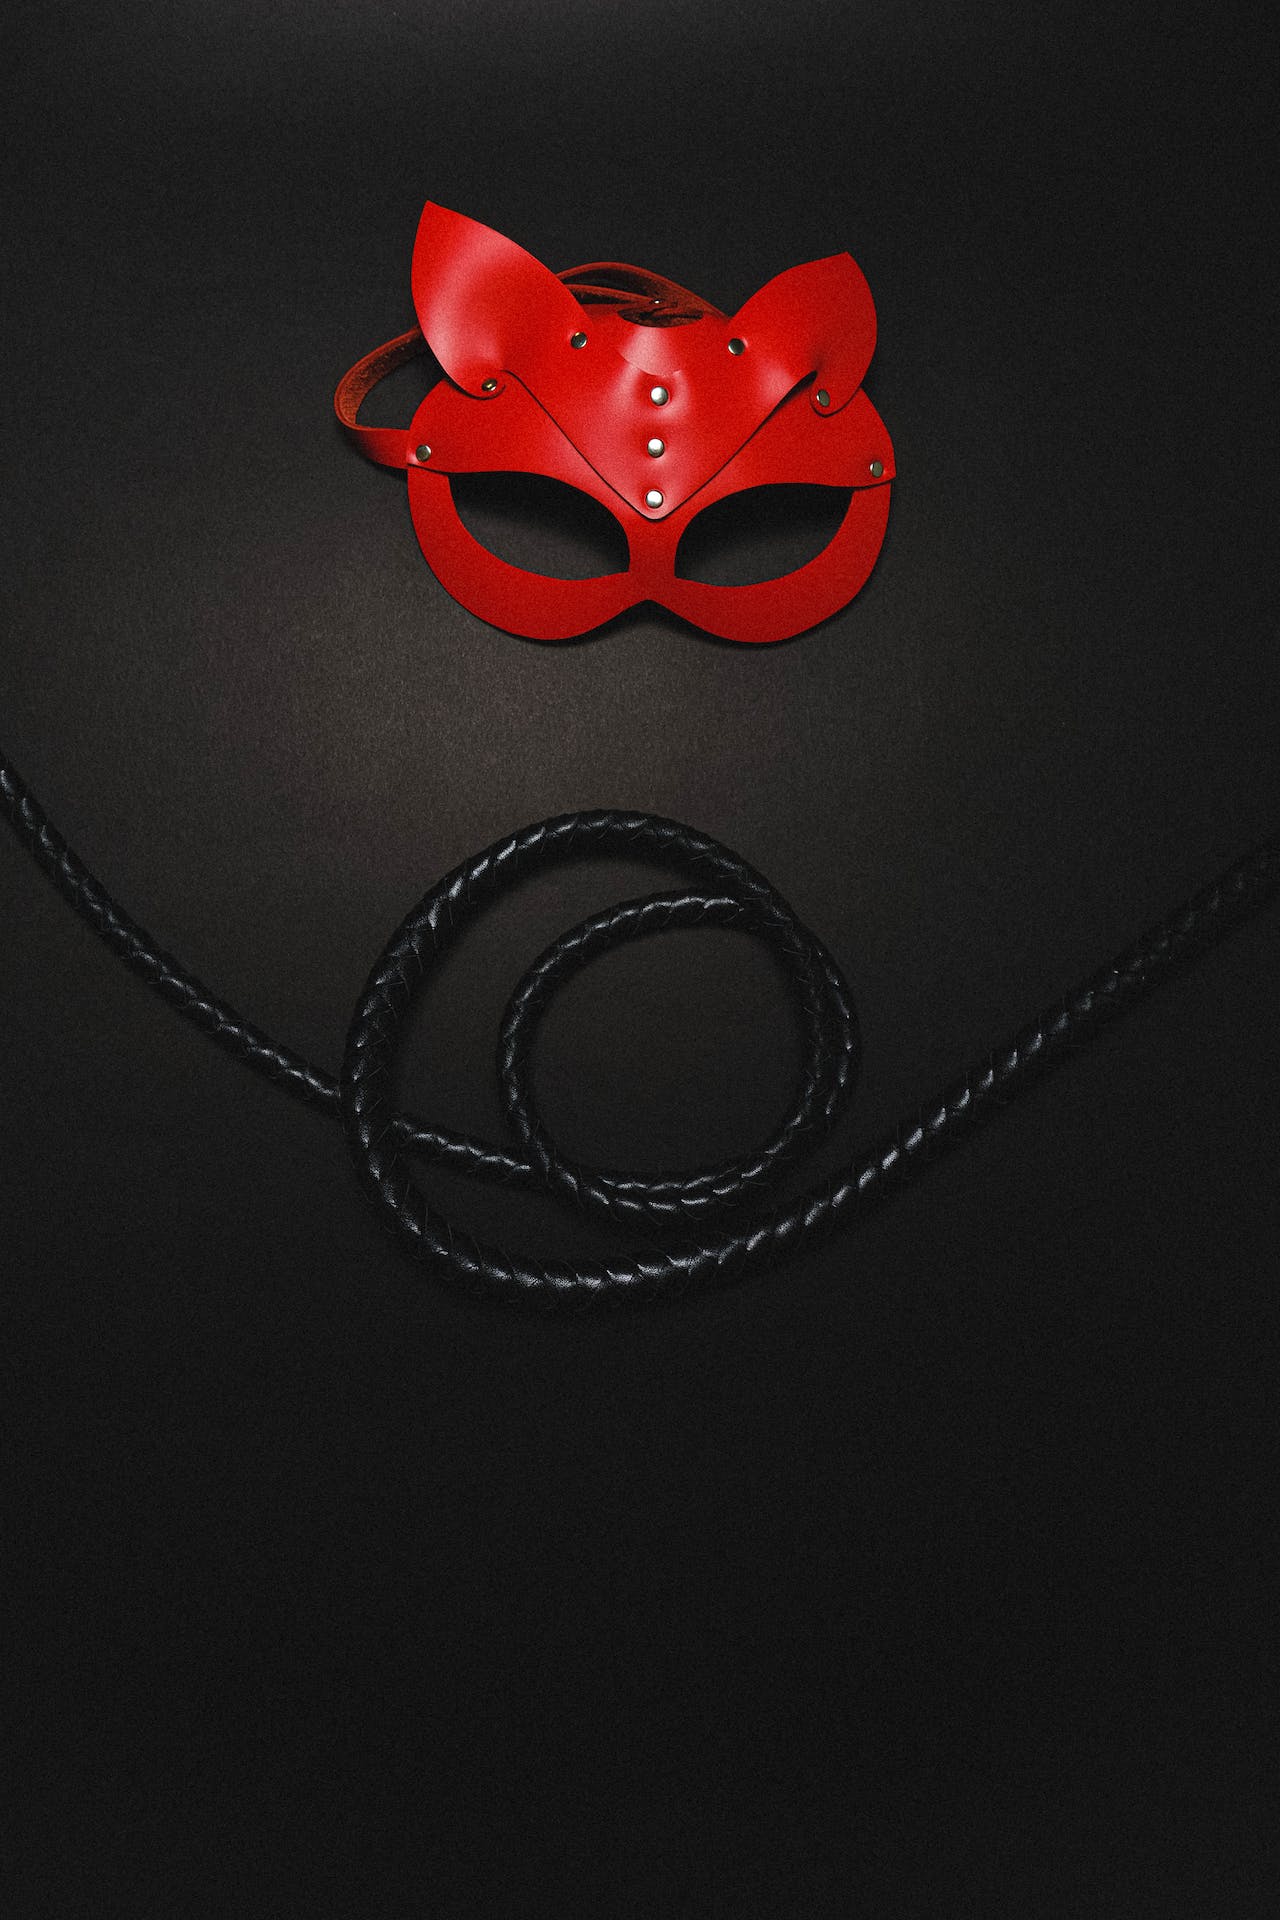 Mask and whip for taboo sex desire.